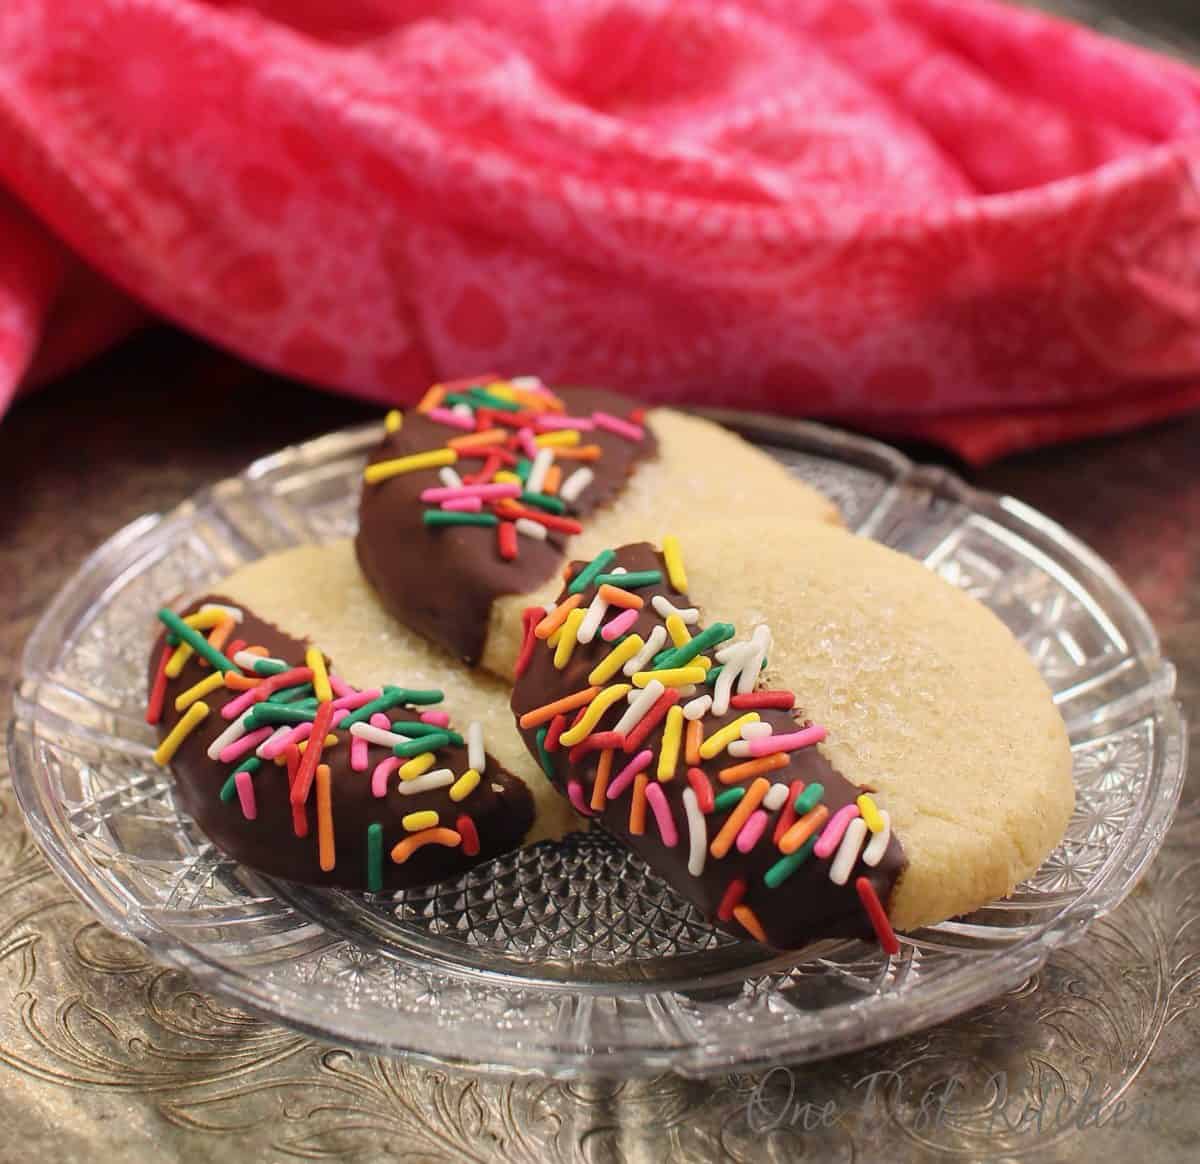 three chocolate dipped cookies on a plate next to a pink napkin.